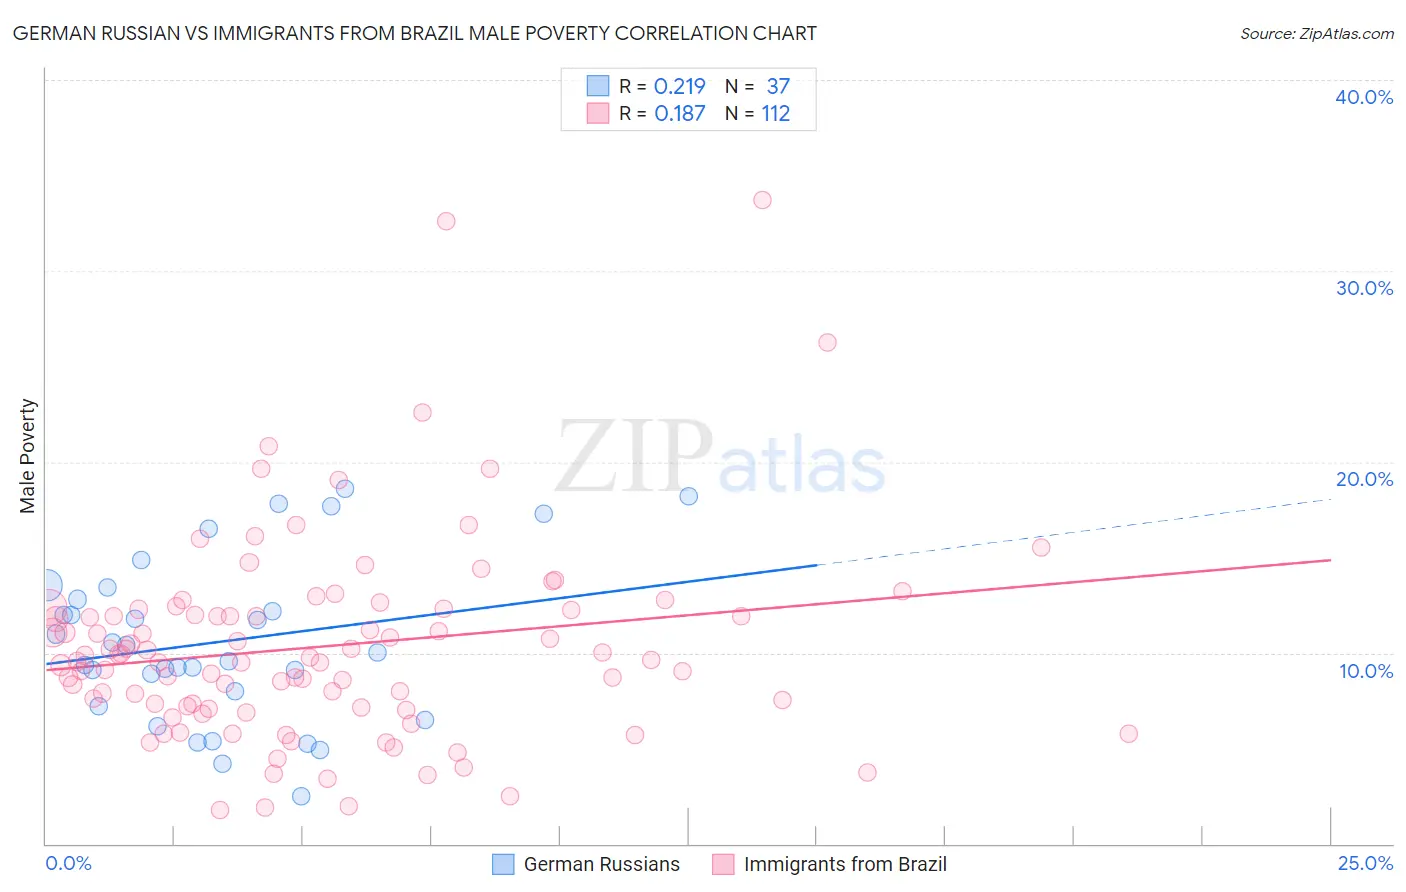 German Russian vs Immigrants from Brazil Male Poverty